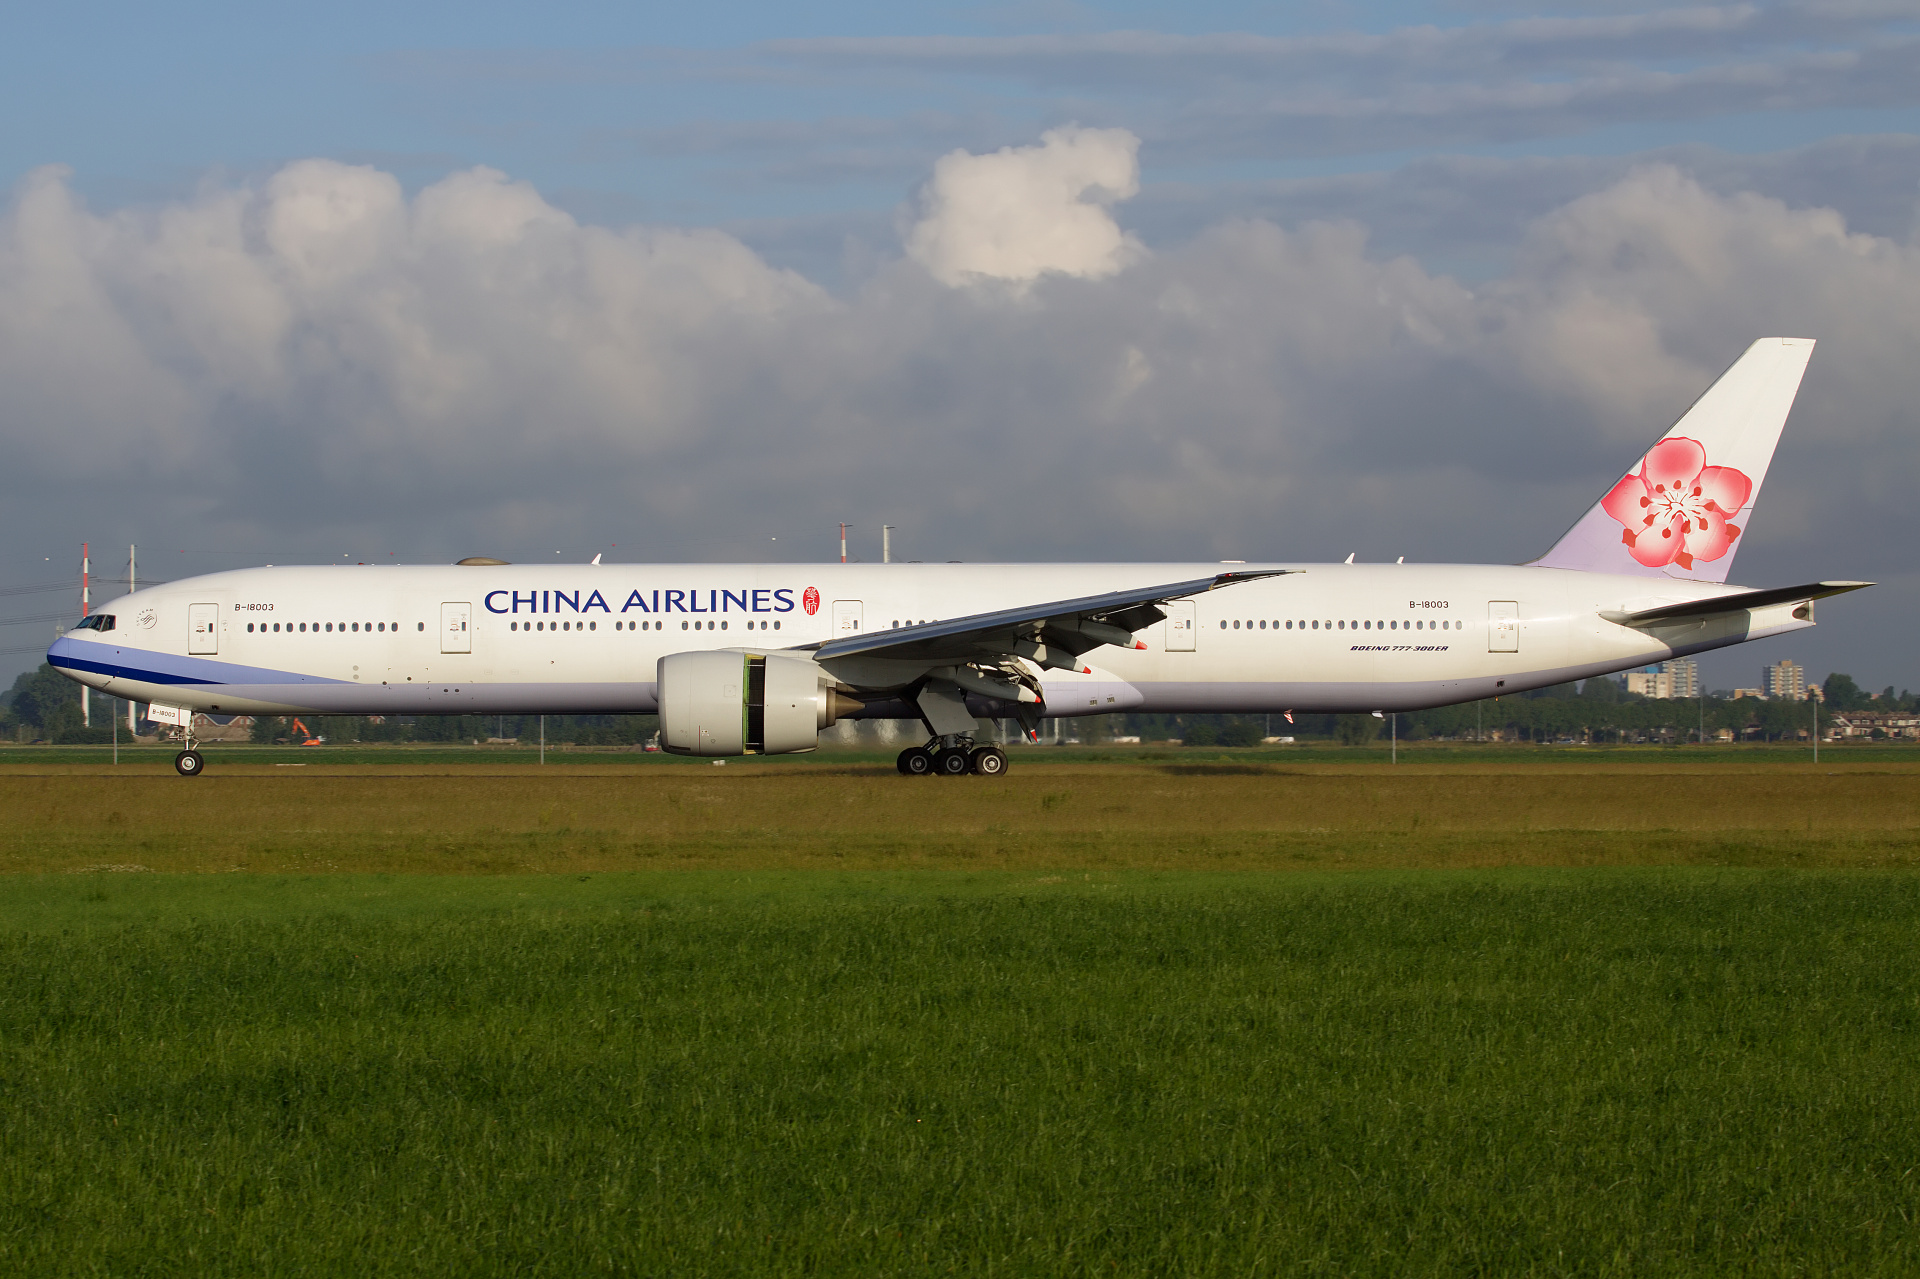 B-18003, China Airlines (Aircraft » Schiphol Spotting » Boeing 777-300ER)